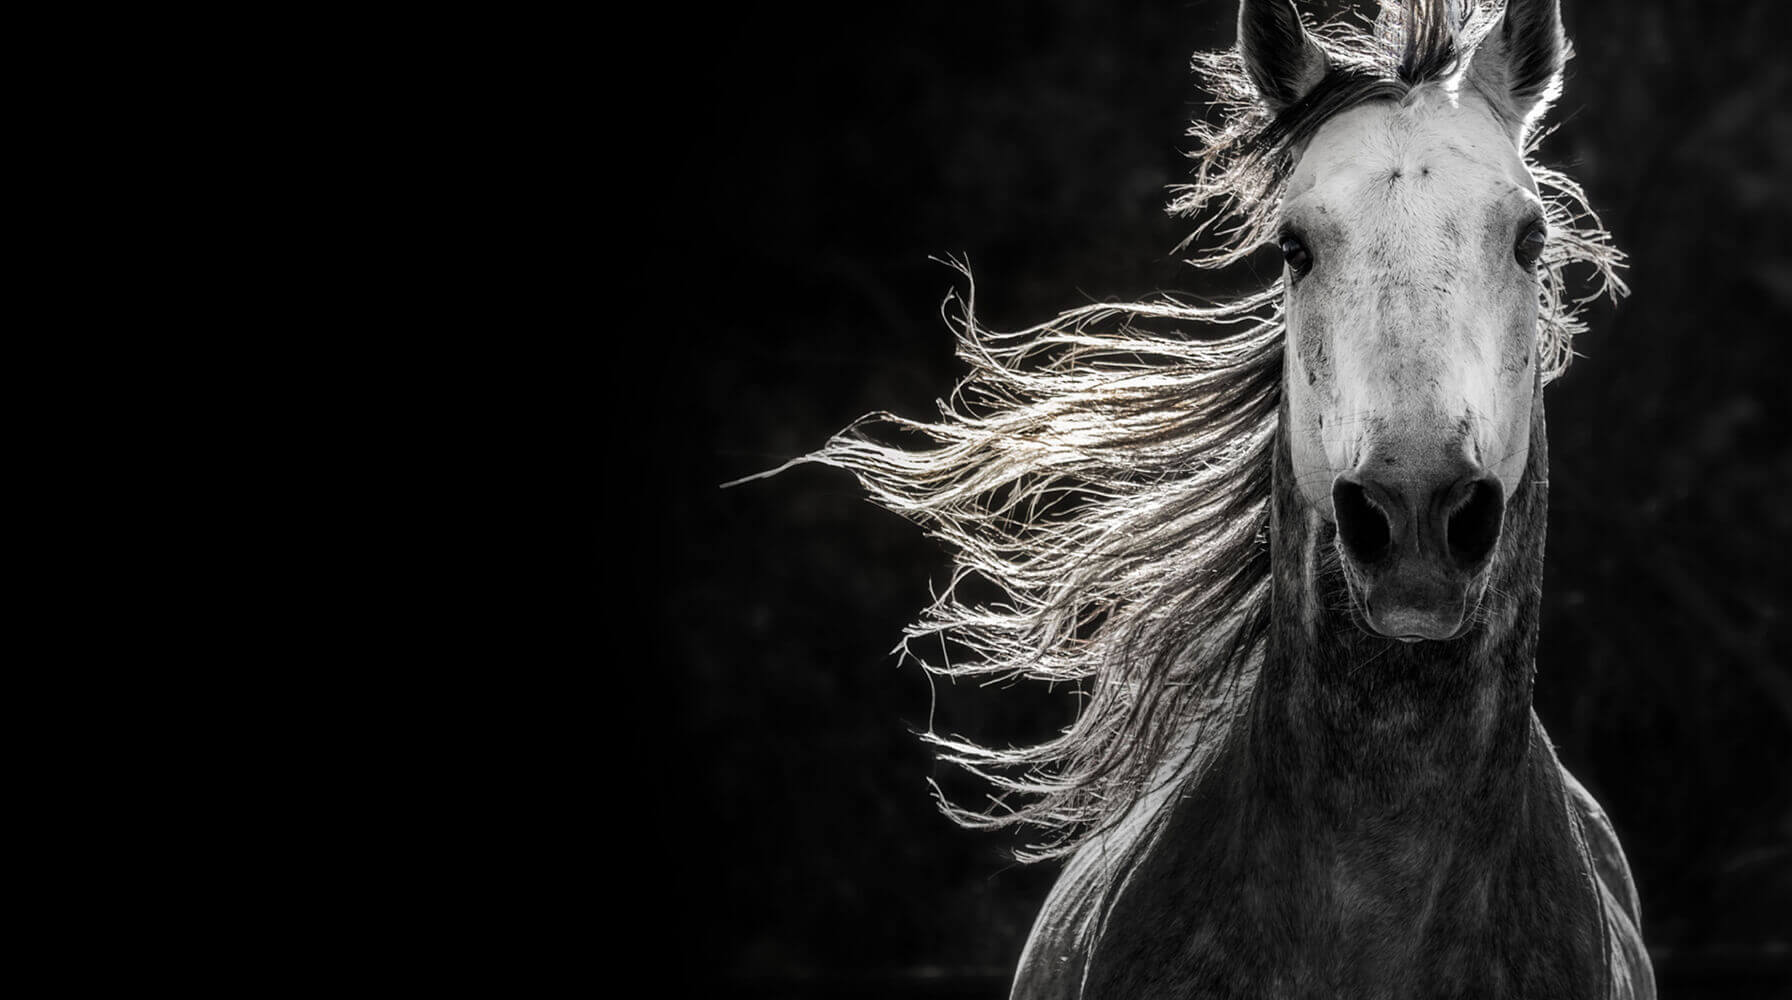 Poster imagery of the Equus film featuring a white horse on a black background